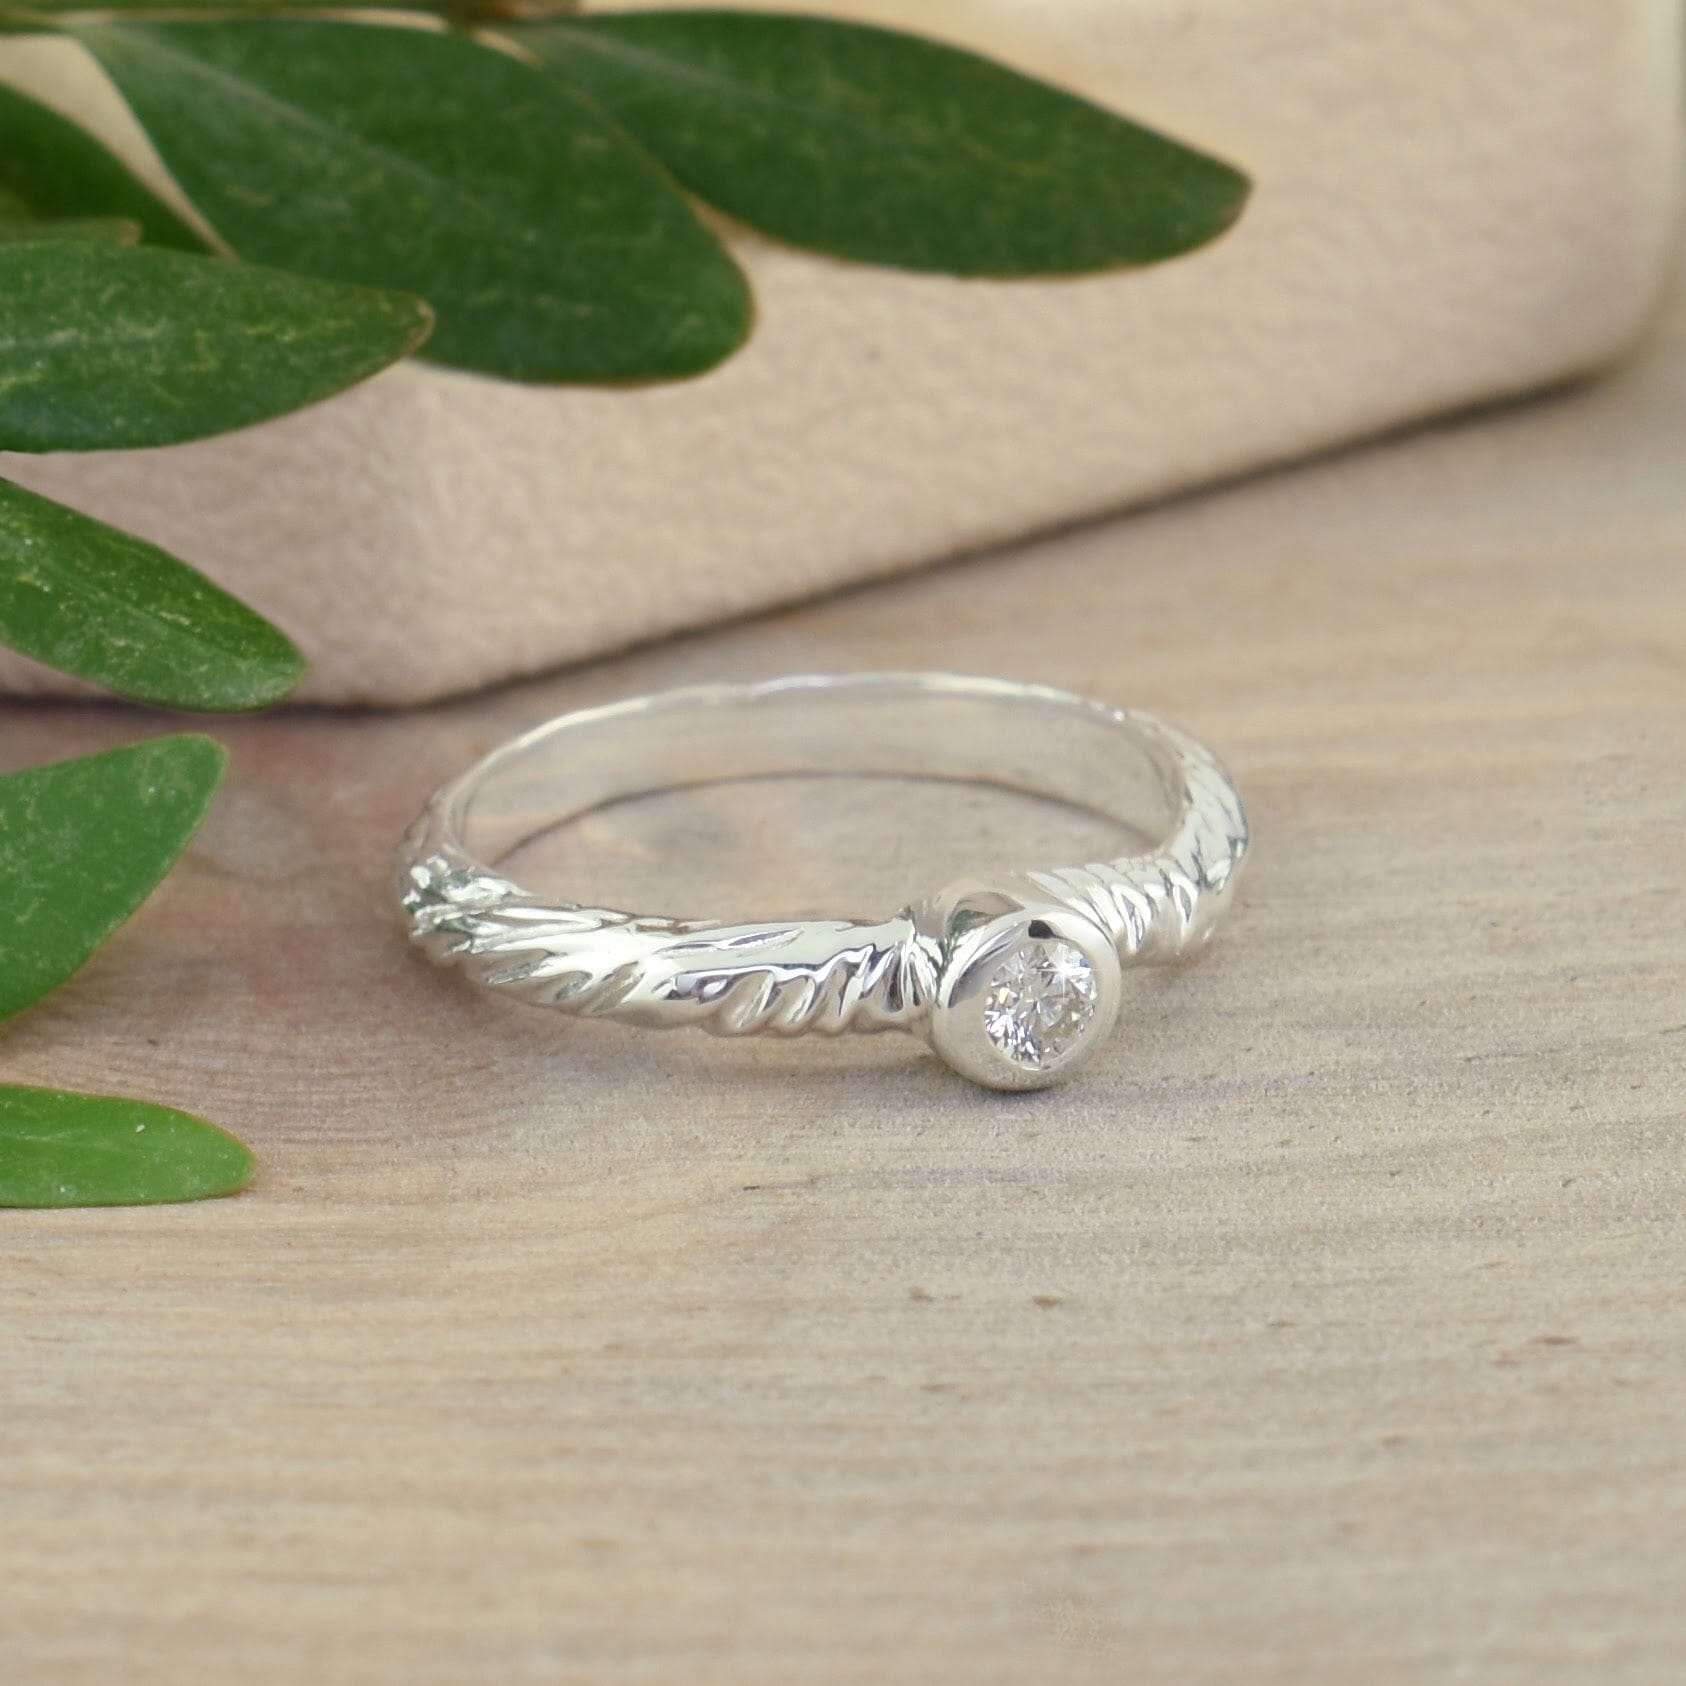 dainty natural diamond ring - Lit'l Distraction